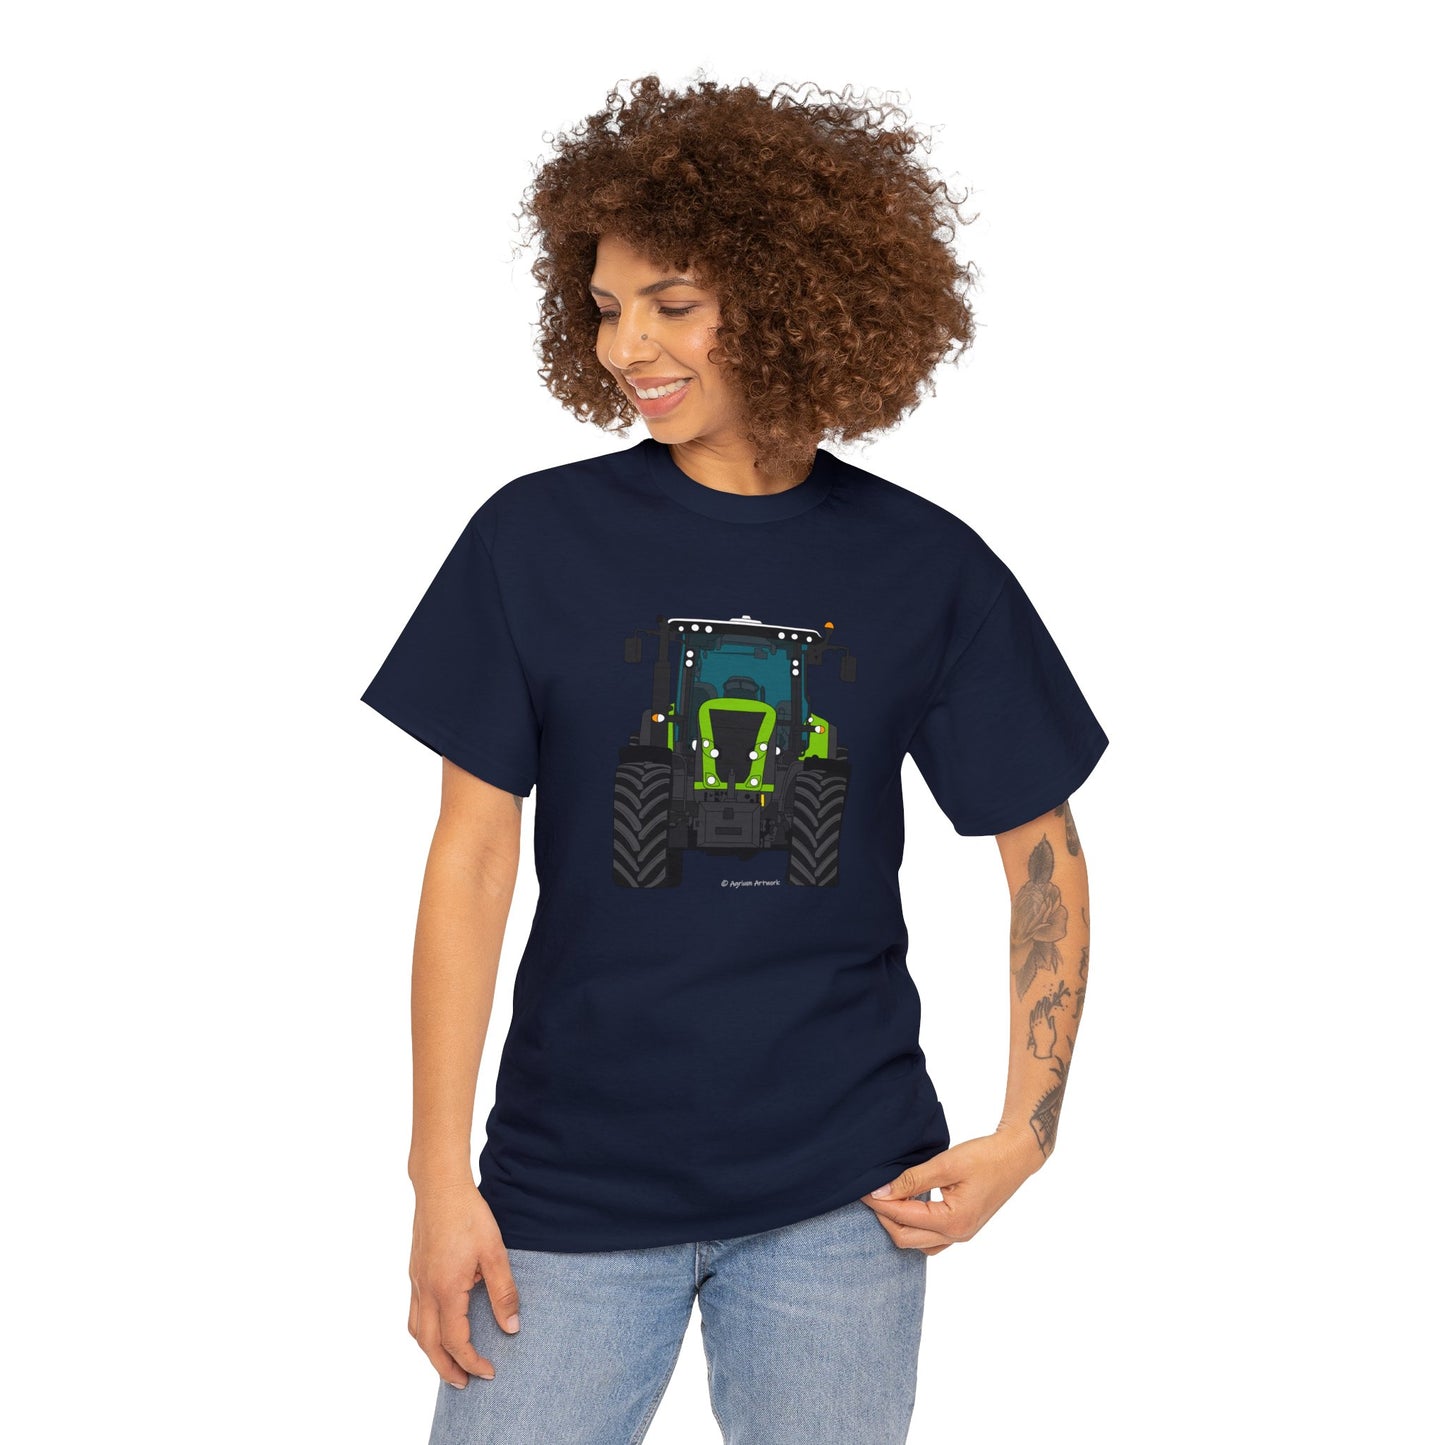 Claas Axion Tractor - Adult Classic Fit Cartoon T-Shirt